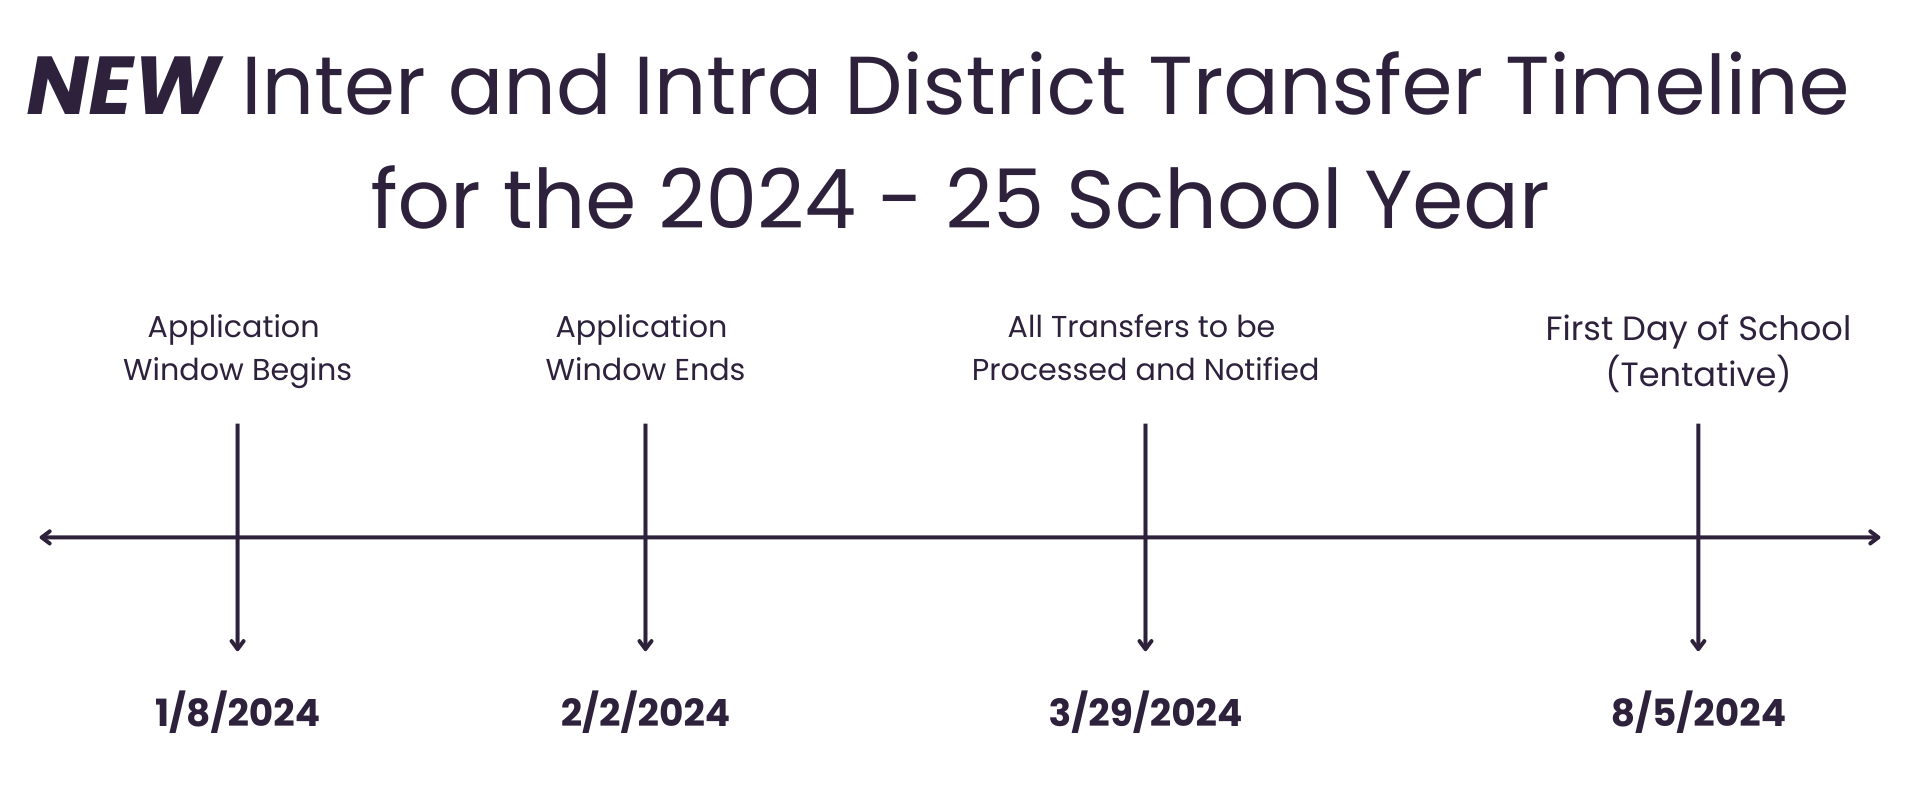 NEW Inter and Intra District Transfer Timeline   for the 2024 - 25 School Year Application  Window Begins Application  Window Ends All Transfers to be  Processed and Notified First Day of School (Tentative) 1/8/2024 2/2/2024 3/29/2024 8/5/2024